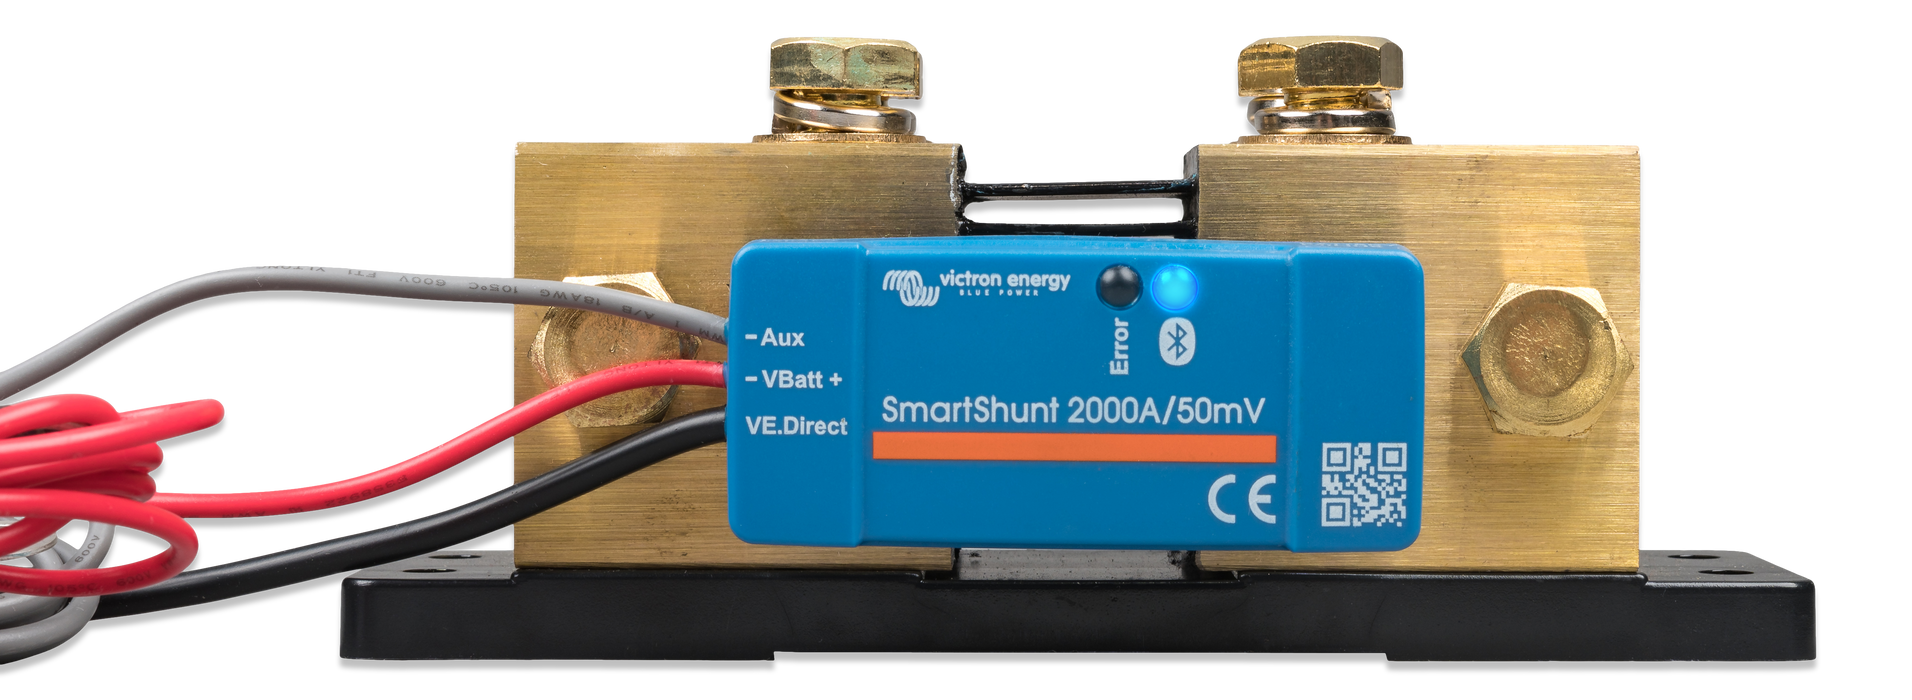 Victron SmartShunt front view with bluetooth